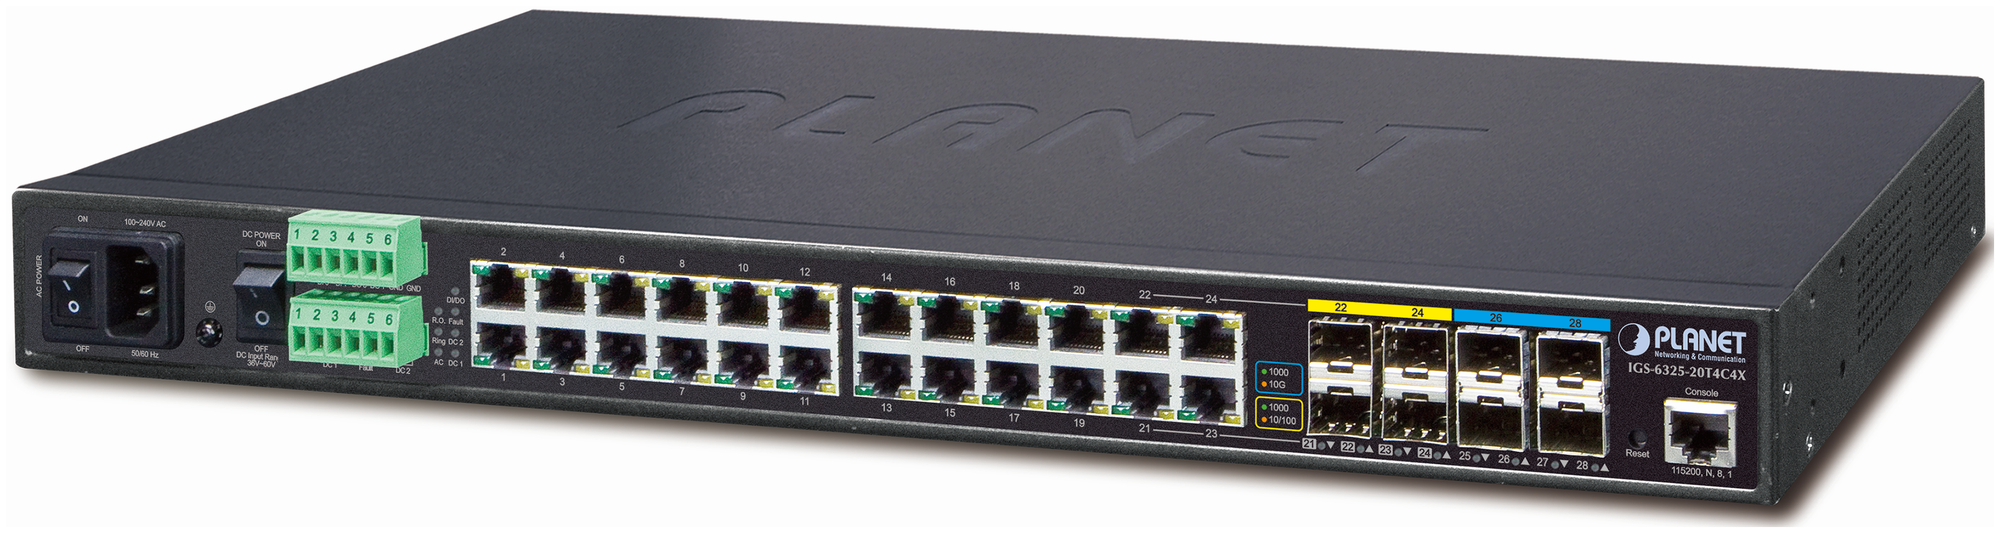 Коммутатор/ PLANET IGS-6325-20T4C4X IP30 19 Rack Mountable Industrial L3 Managed Core Ethernet Switch, 24*1000T with 4 shared 100/1000X SFP + 4*10G SF